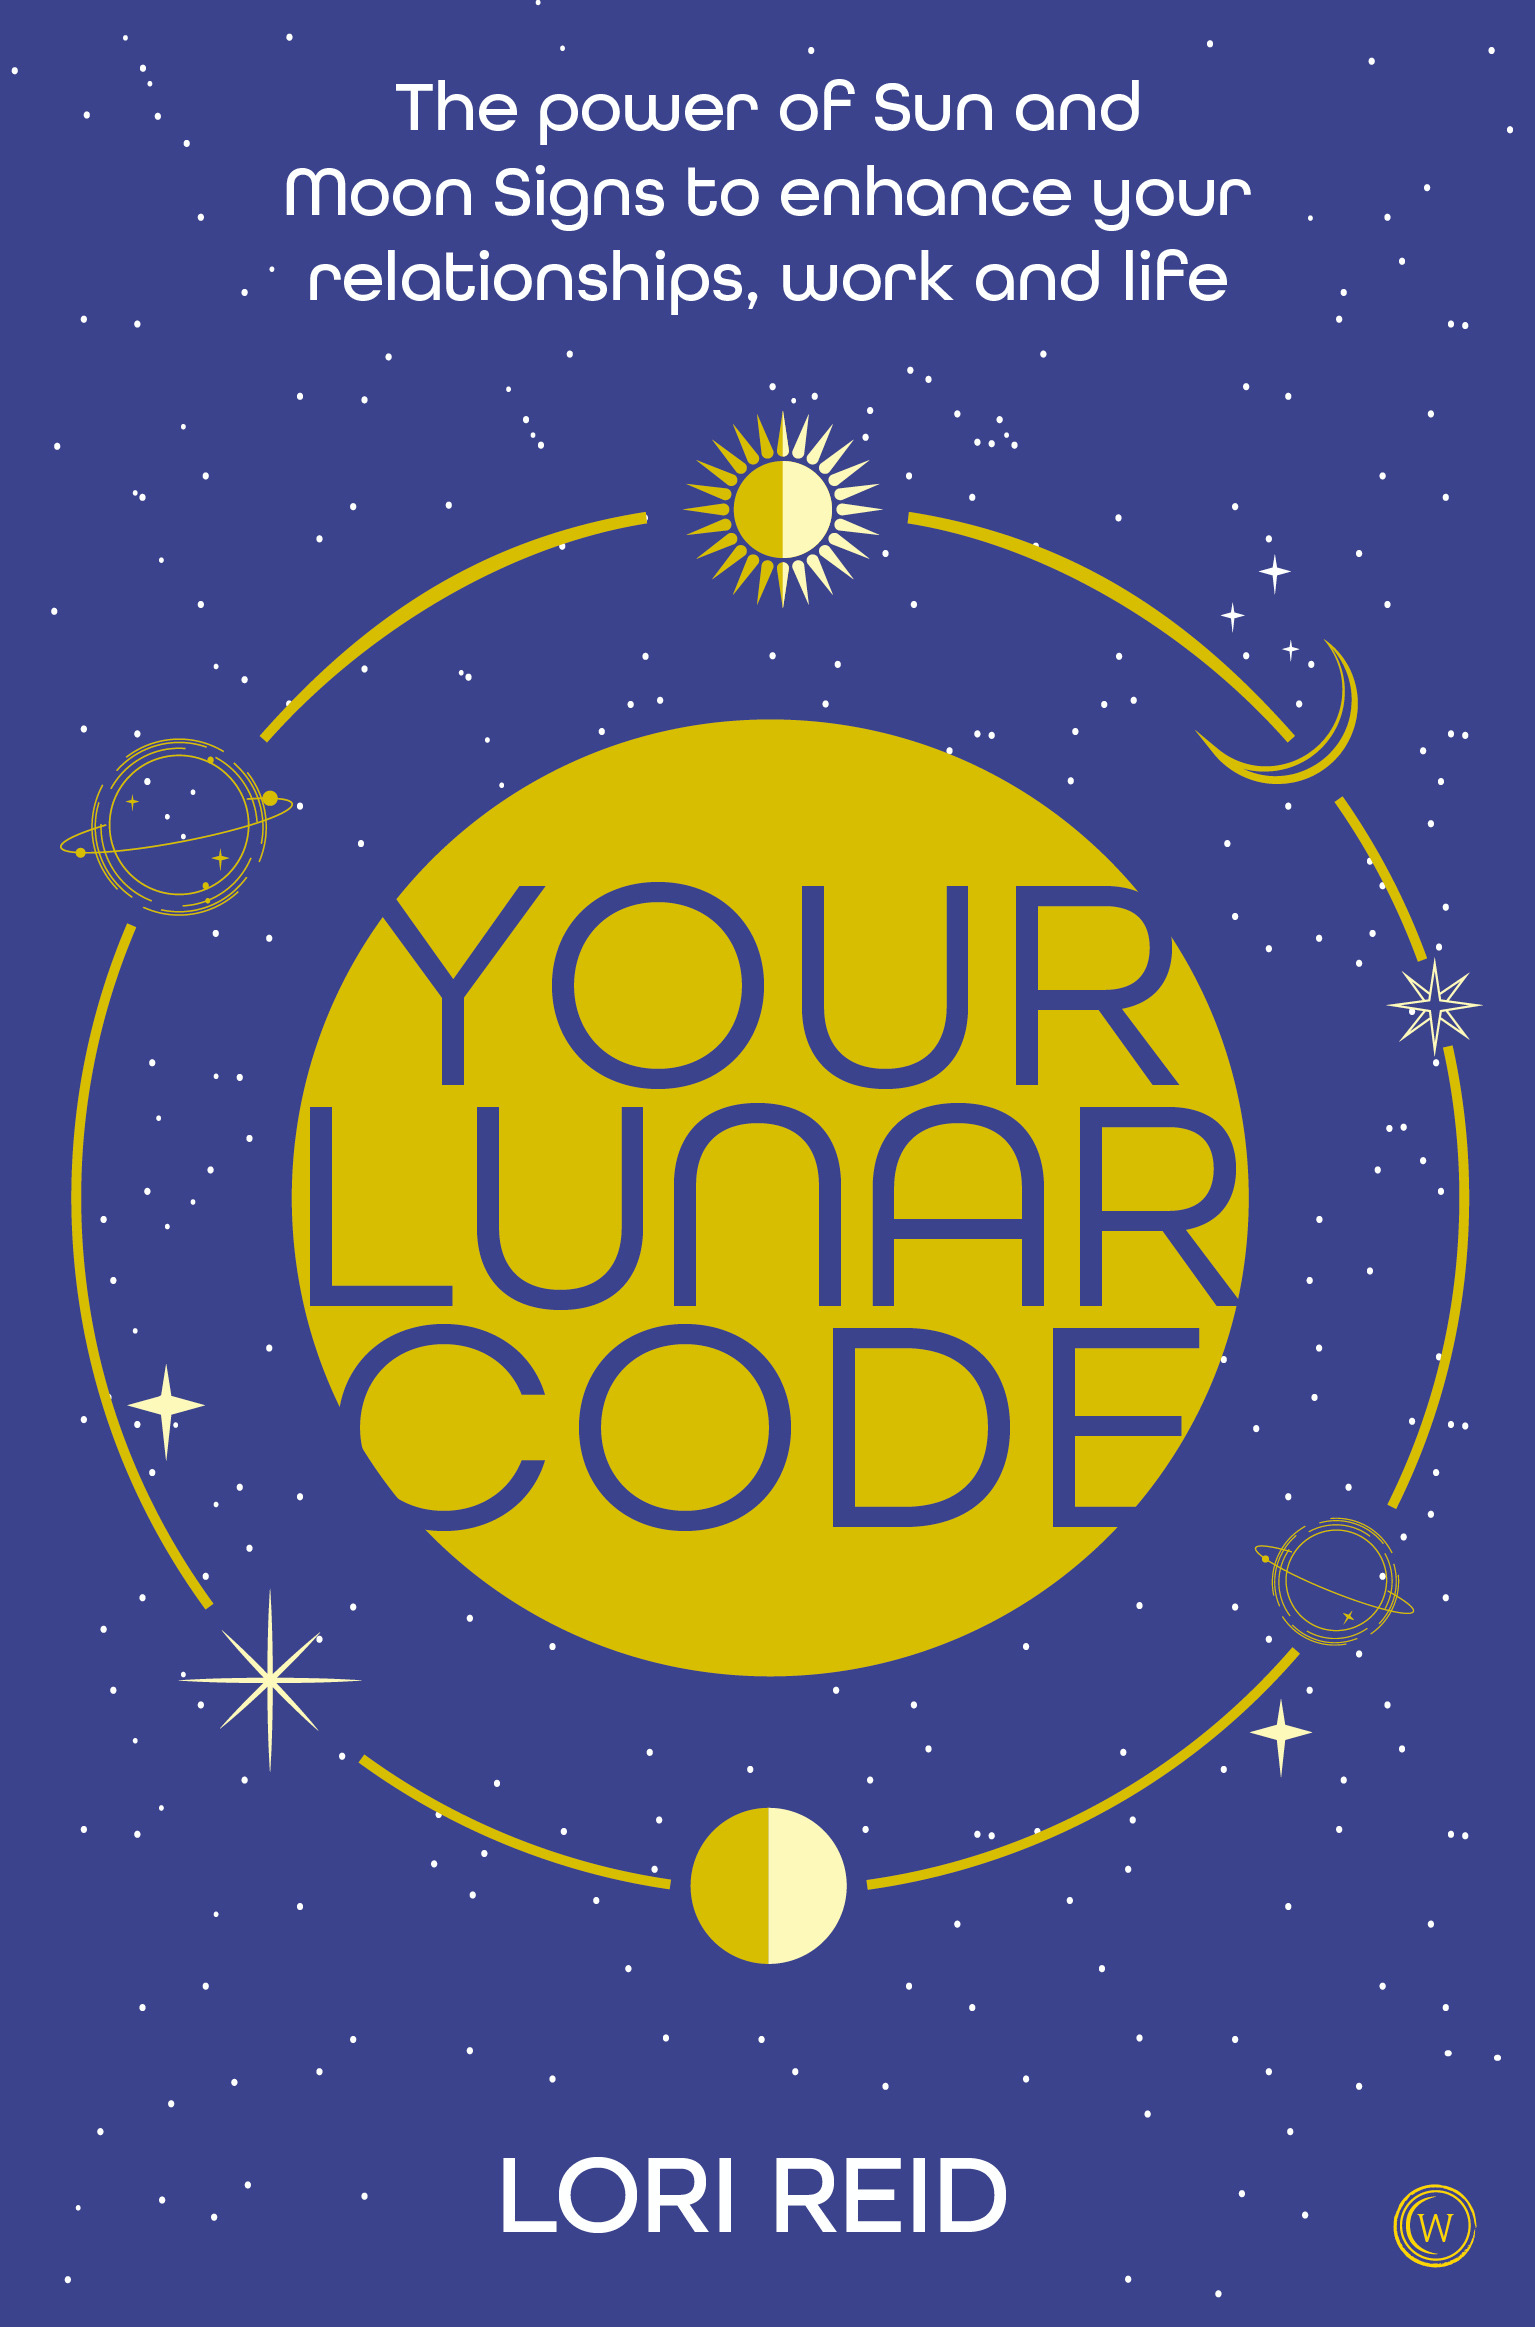 Your Lunar Code : The power of moon and sun signs to enhance your relationships, work and life | Reid, Lori